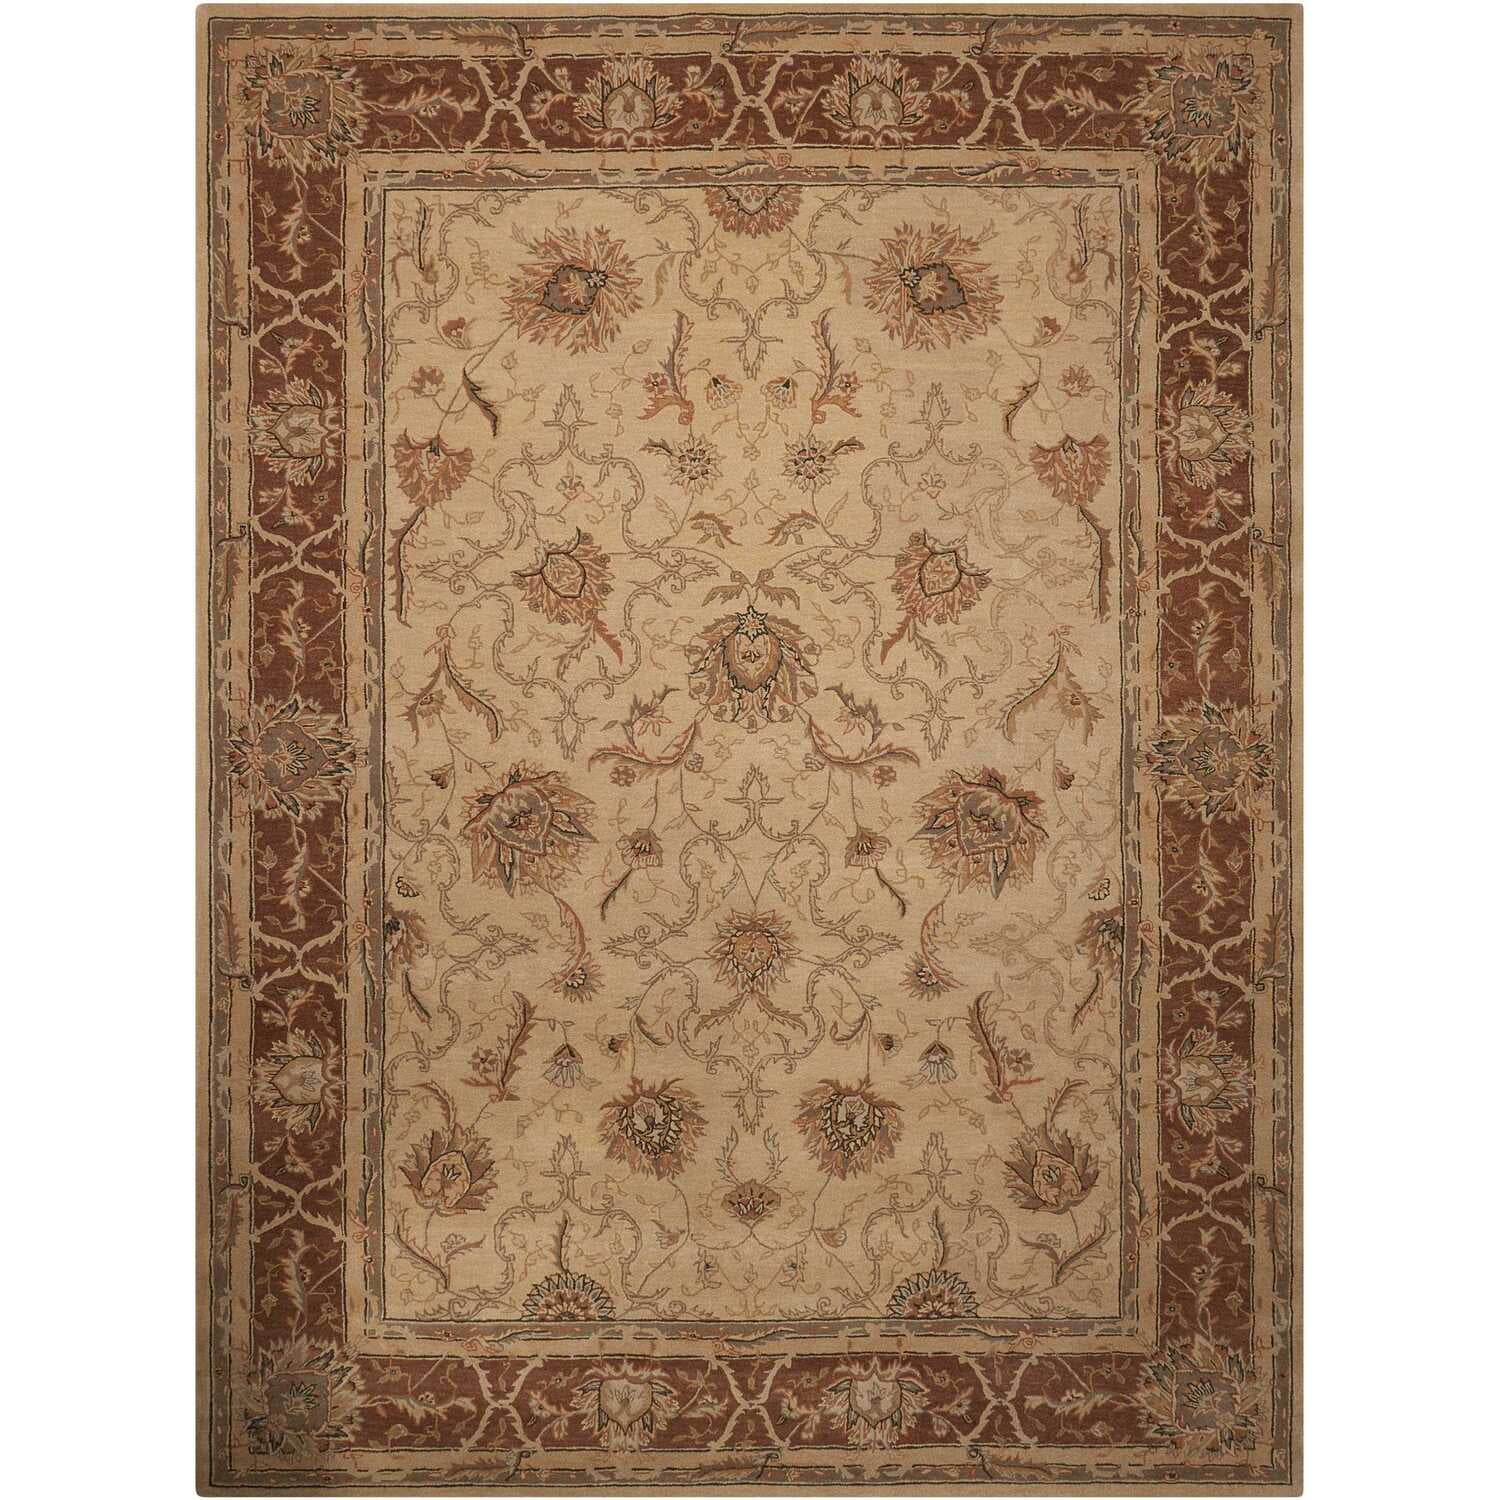 8-Feet 6-Inches by 11-Feet 6-Inches Nourison Heritage Hall Black Rectangle Area Rug 8'6 x 11'6